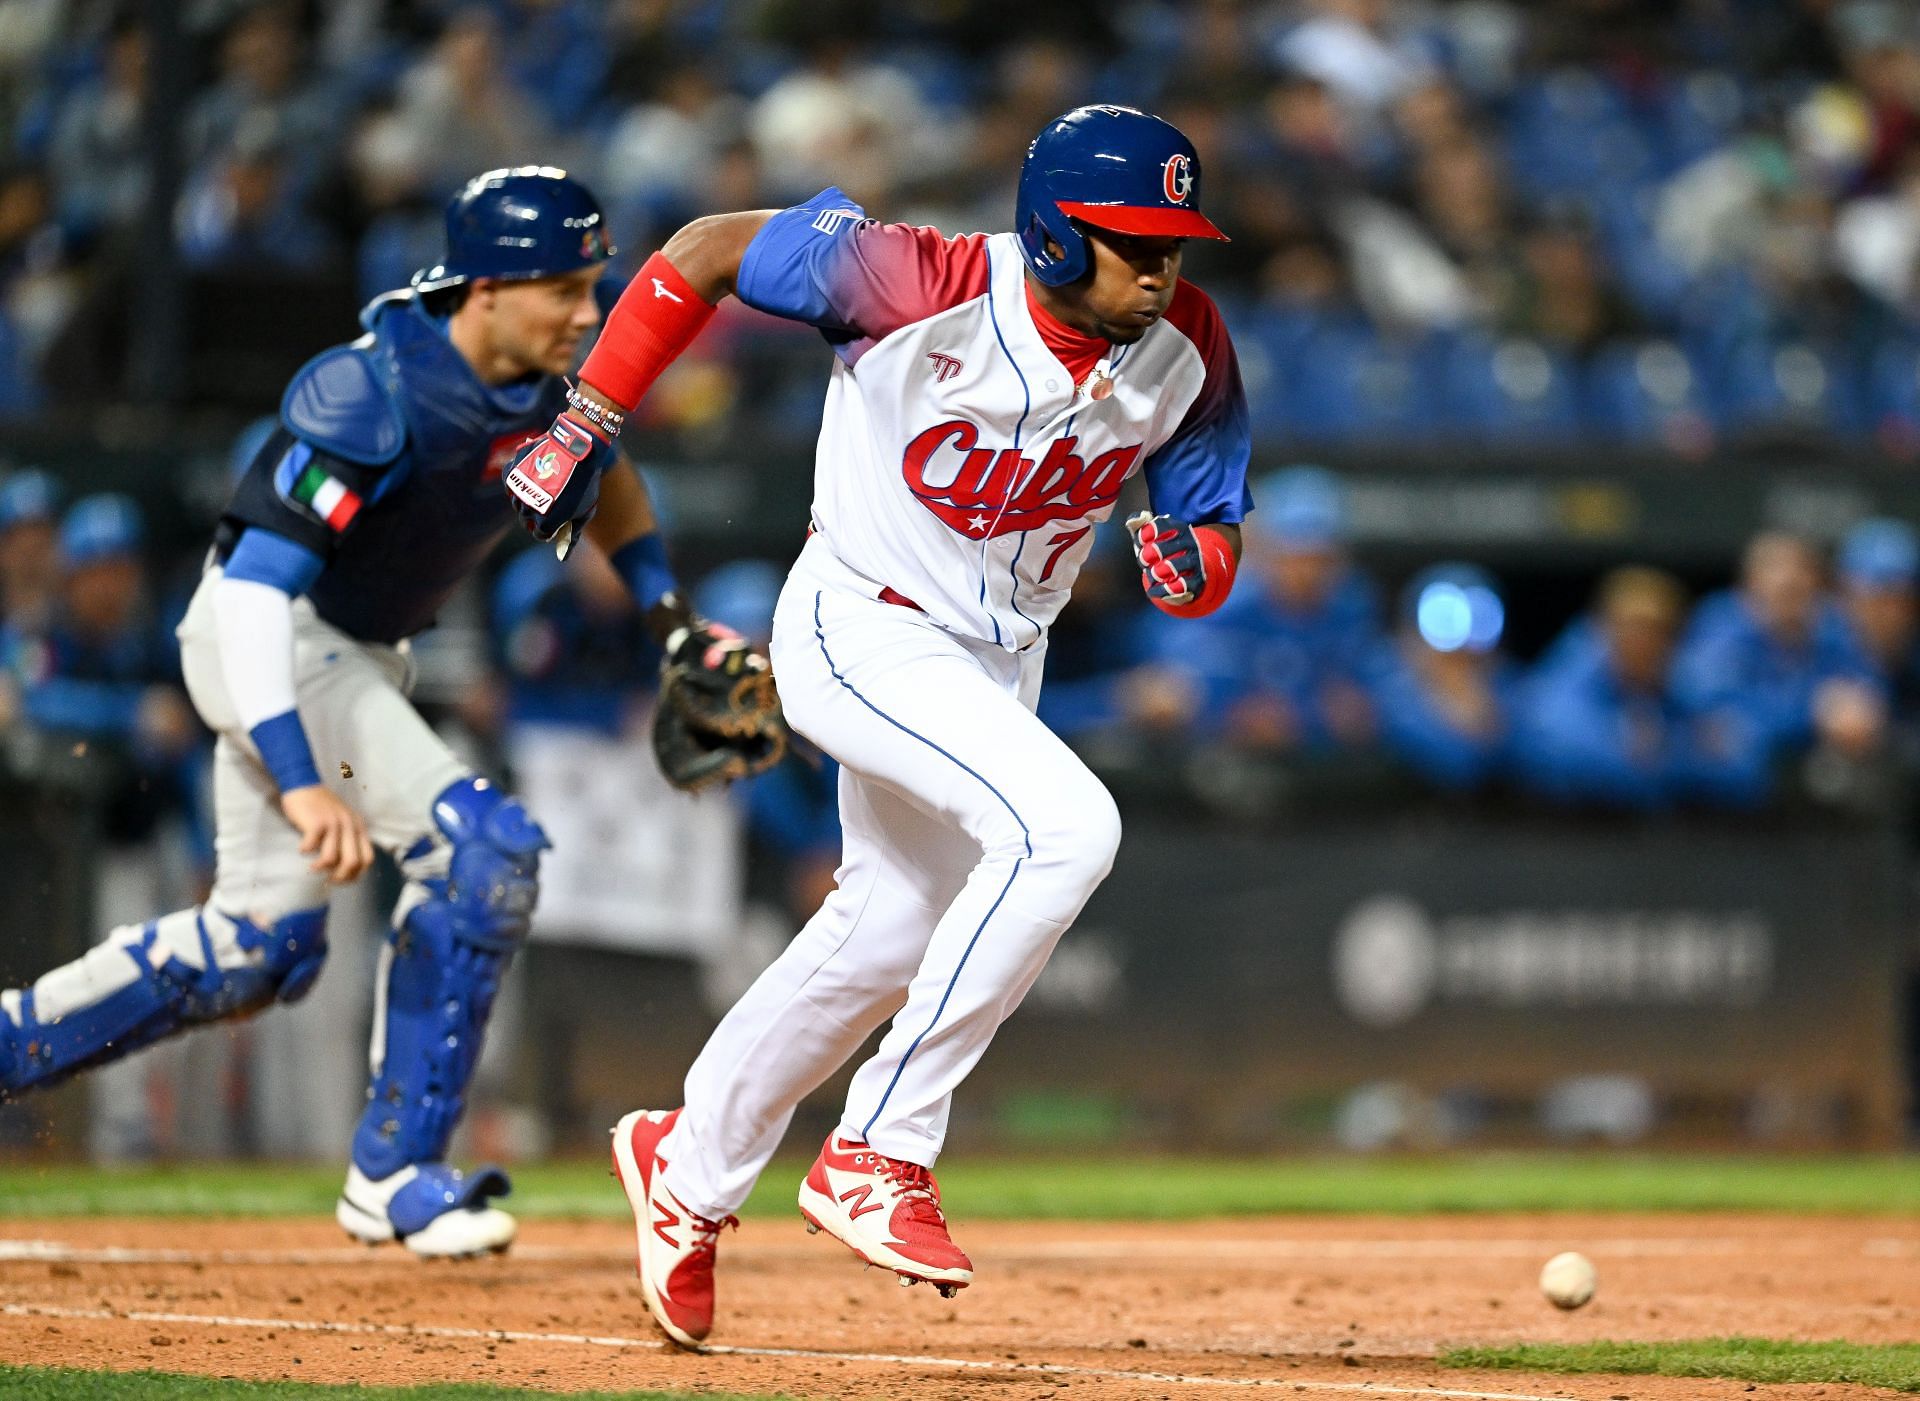 Cuba vs Panama WBC Live Where to watch, TV, streaming options, and more